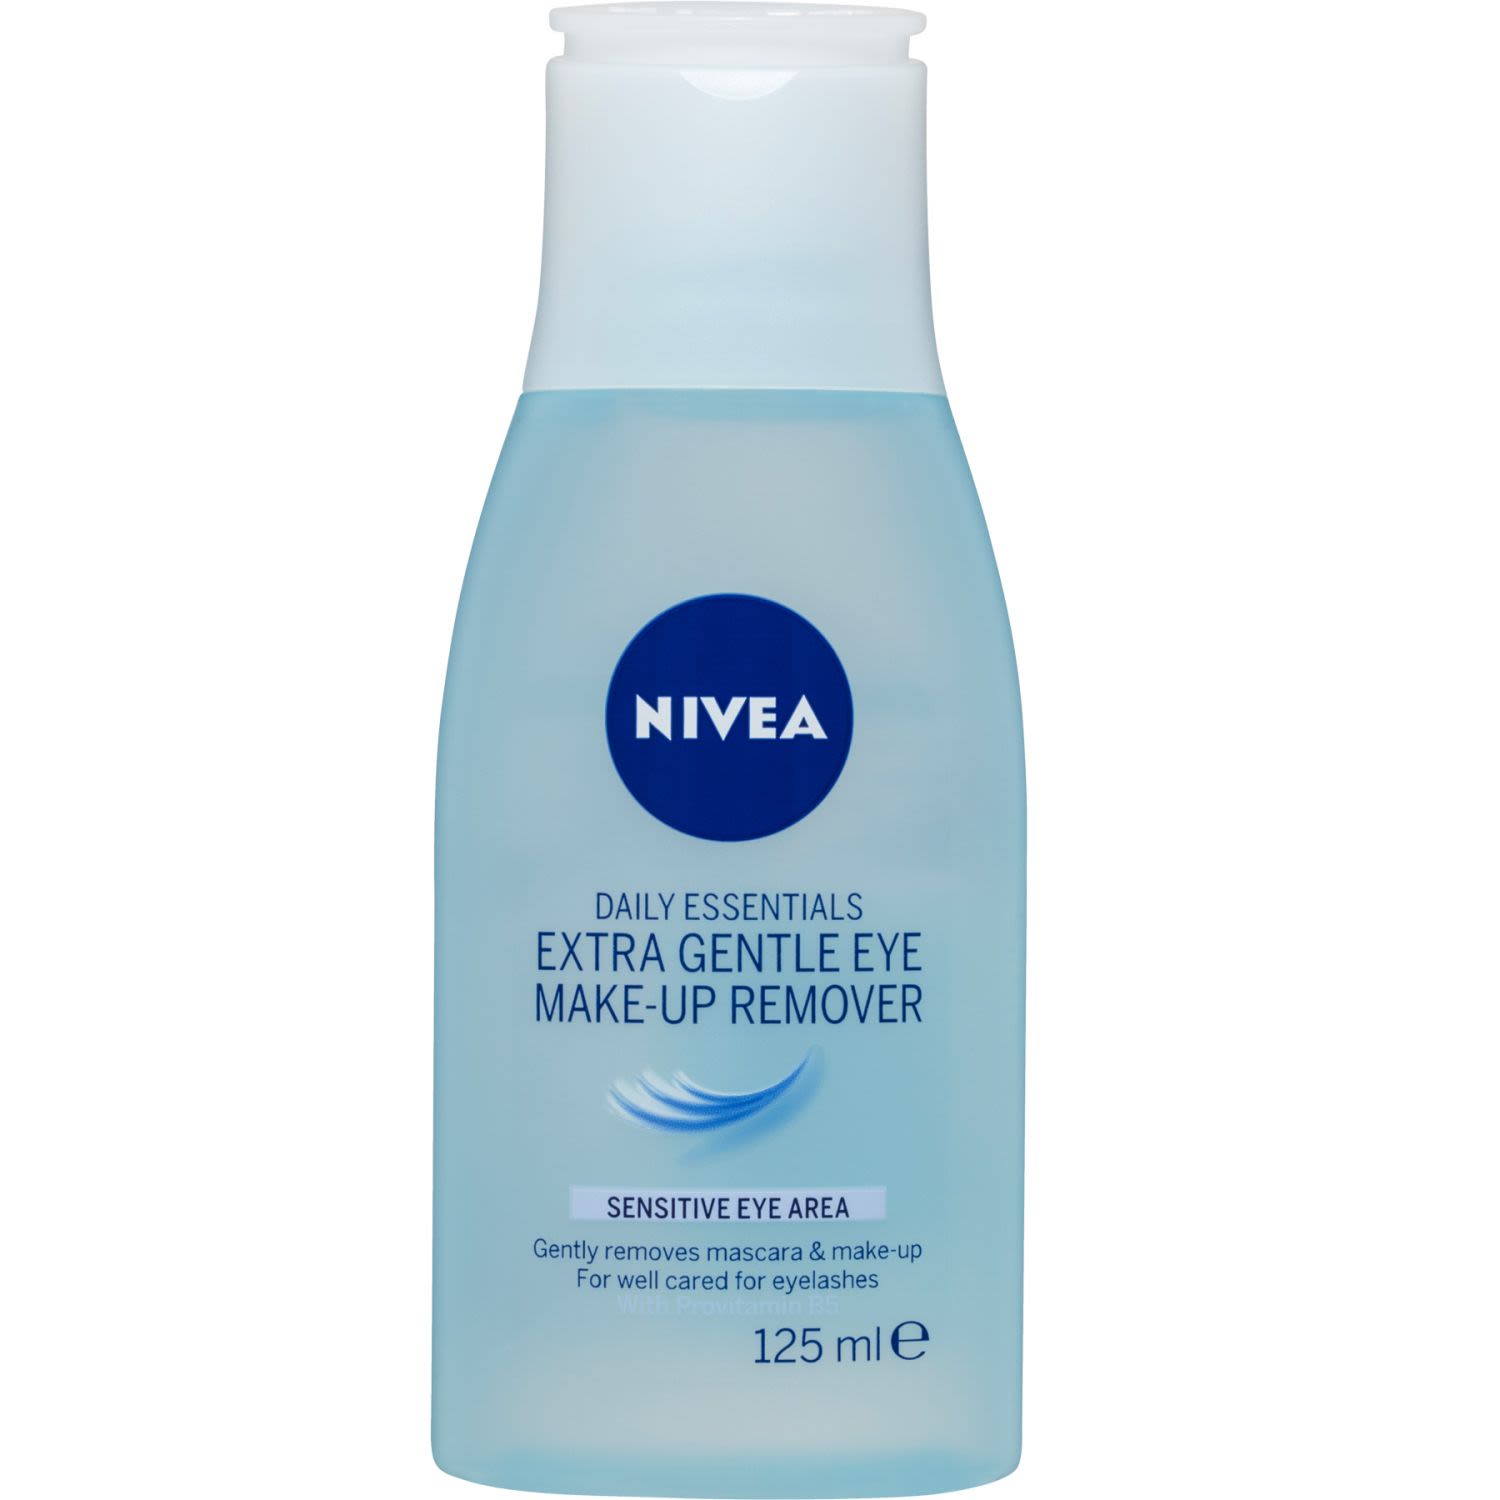 Nivea Daily Essentials Extra Gentle Eye Make-up Remover, 125 Millilitre